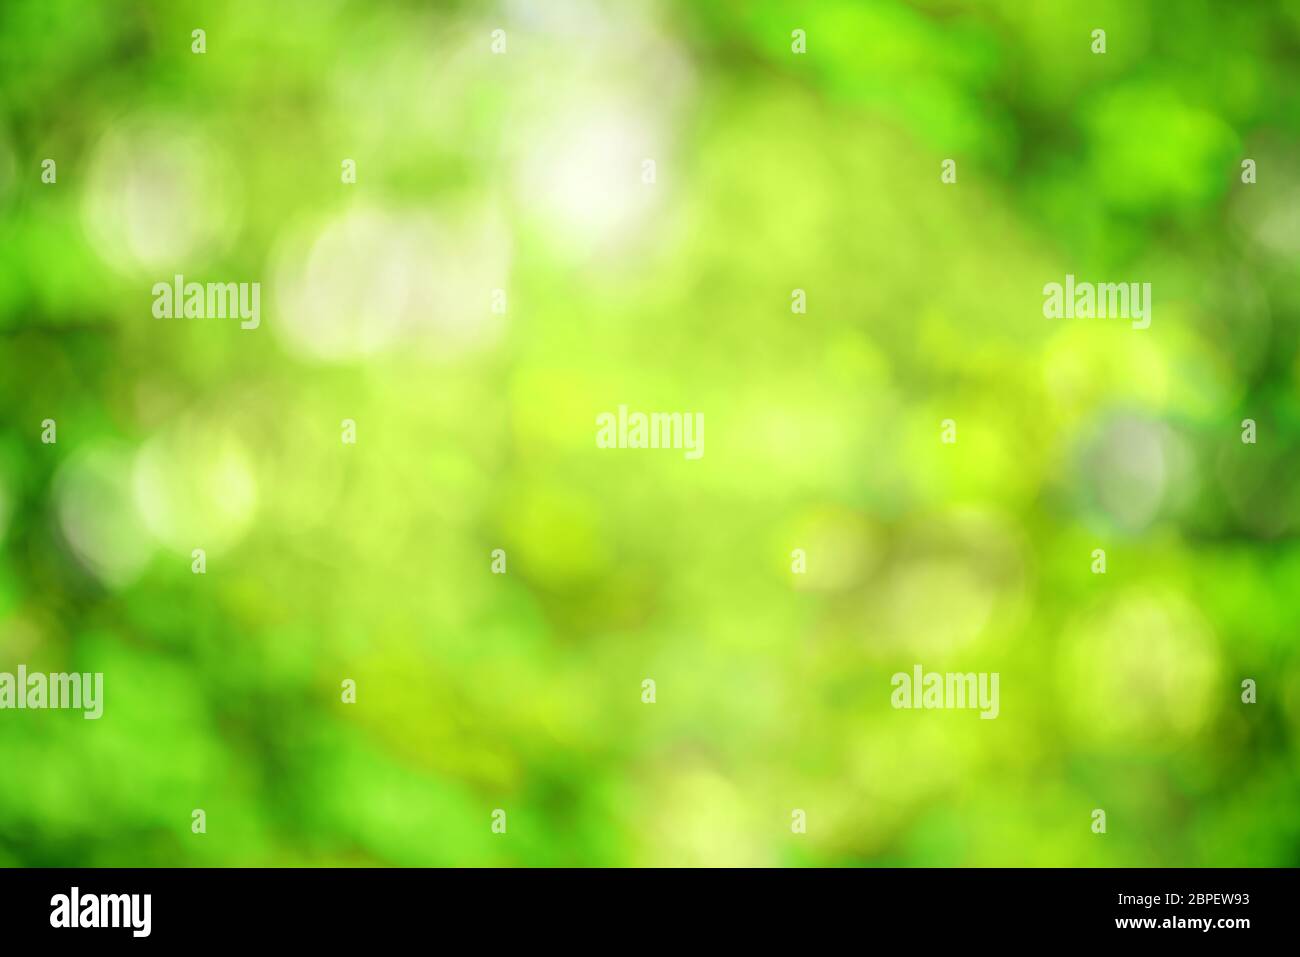 Abstract bright green spring background with tender bokeh for a concept Stock Photo